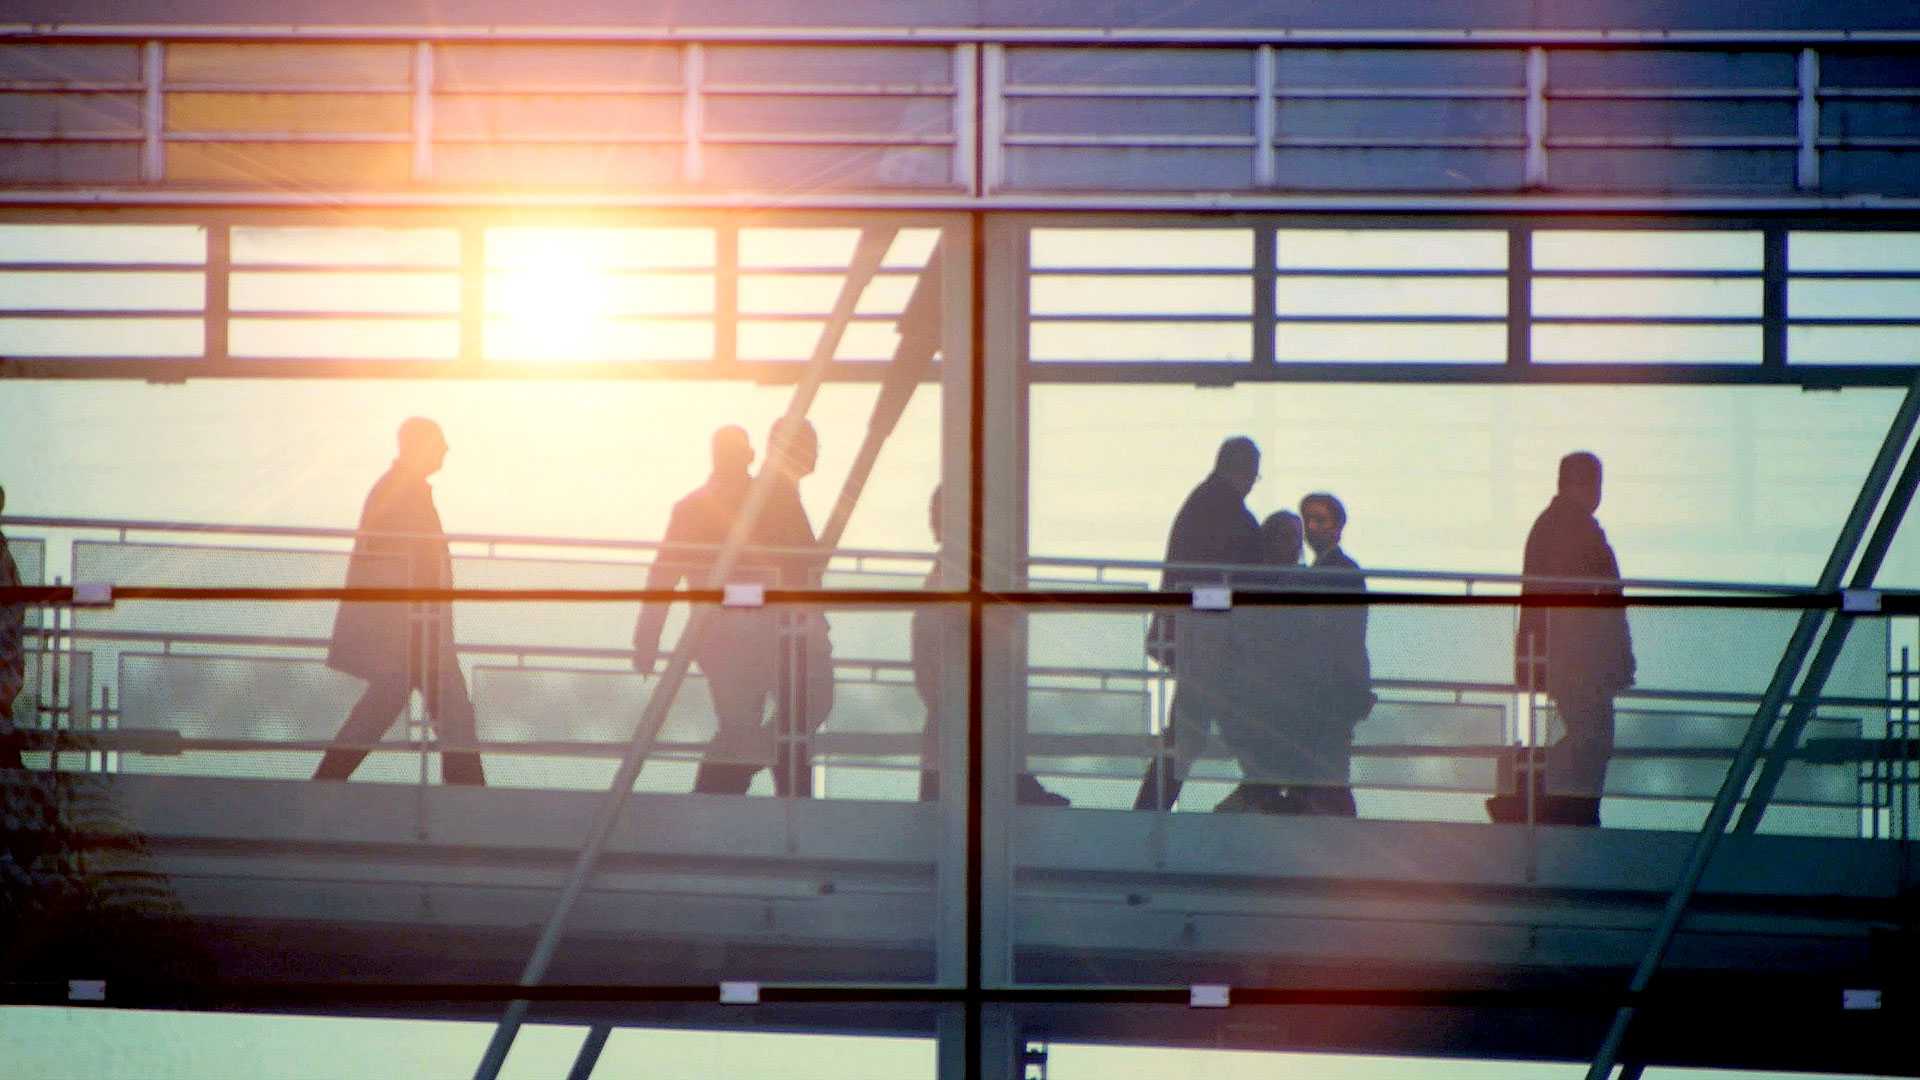 american commuters in a skybridge going to an office building